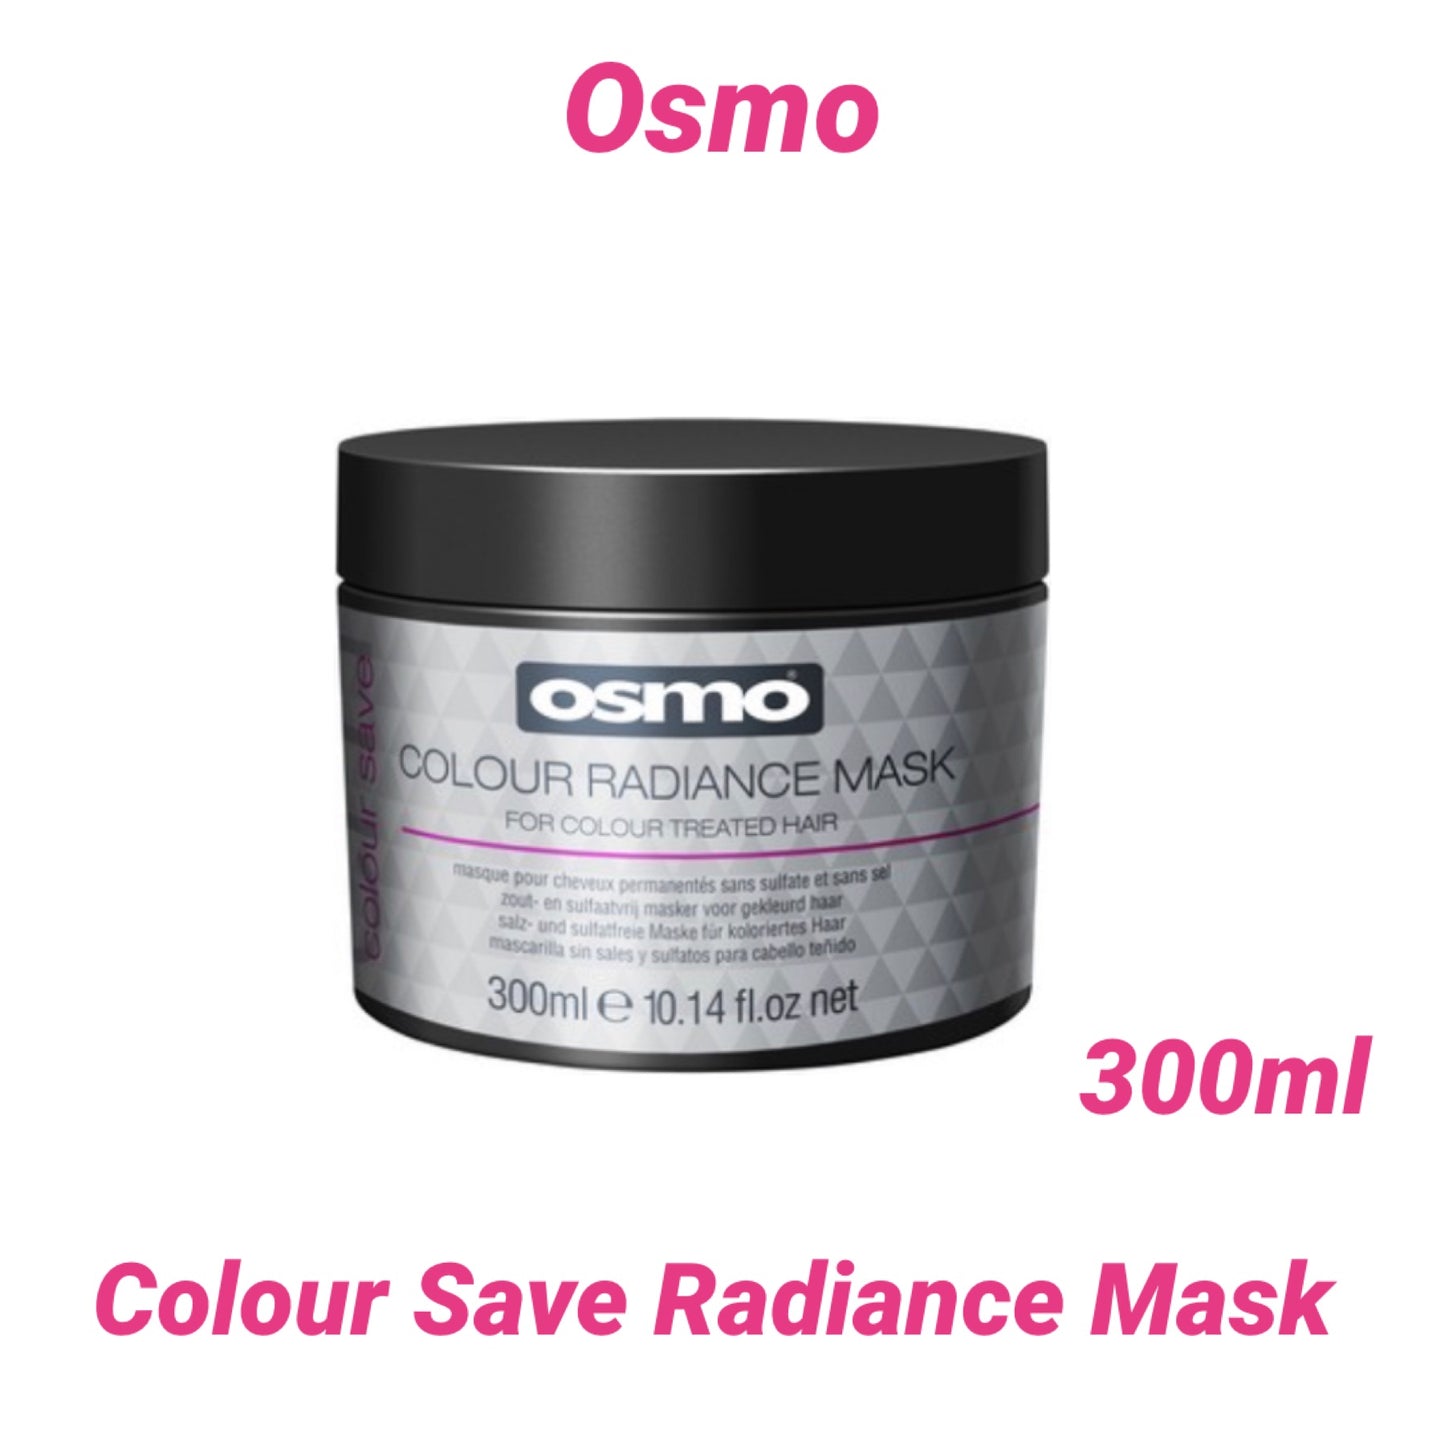 Osmo Colour Radiance Mask